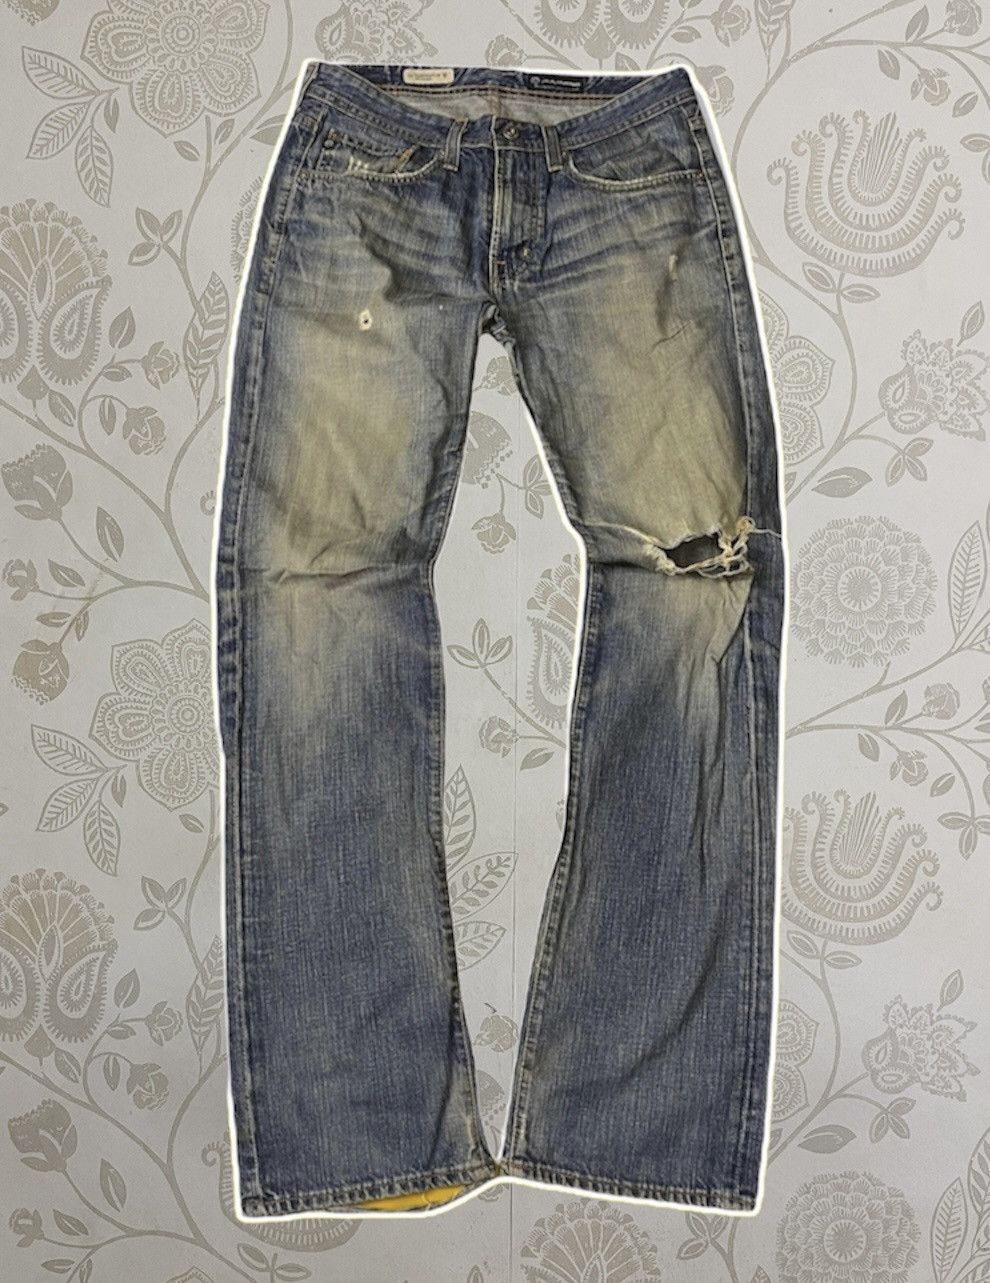 VINTAGE DISTRESSED AG ADRIANO GOLDSCHMIED - 13